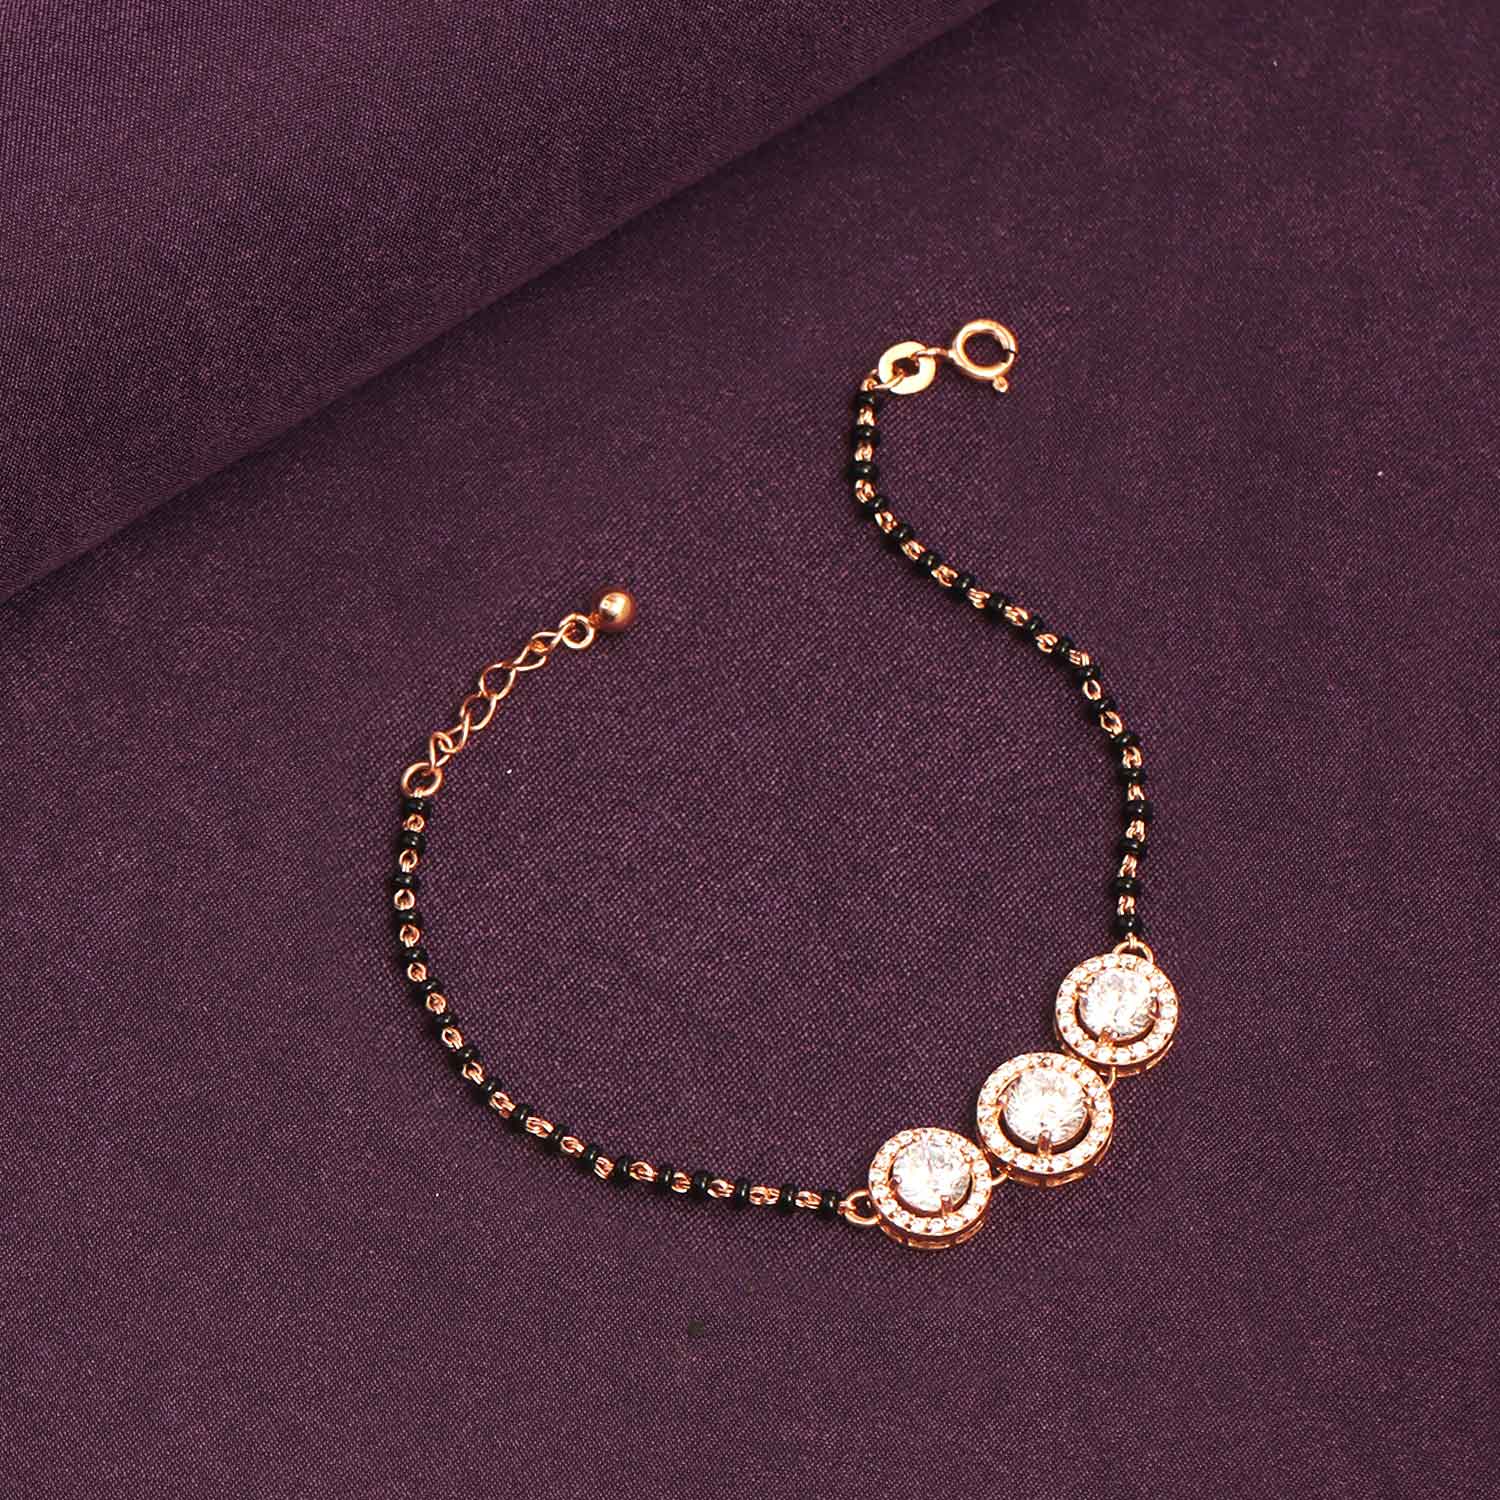 925 Sterling Silver 14K Rose Gold Plated Cubic Zirconia Solitaire Mangalsutra Crystalball Adjustable Hand Wrist Bracelet for Women